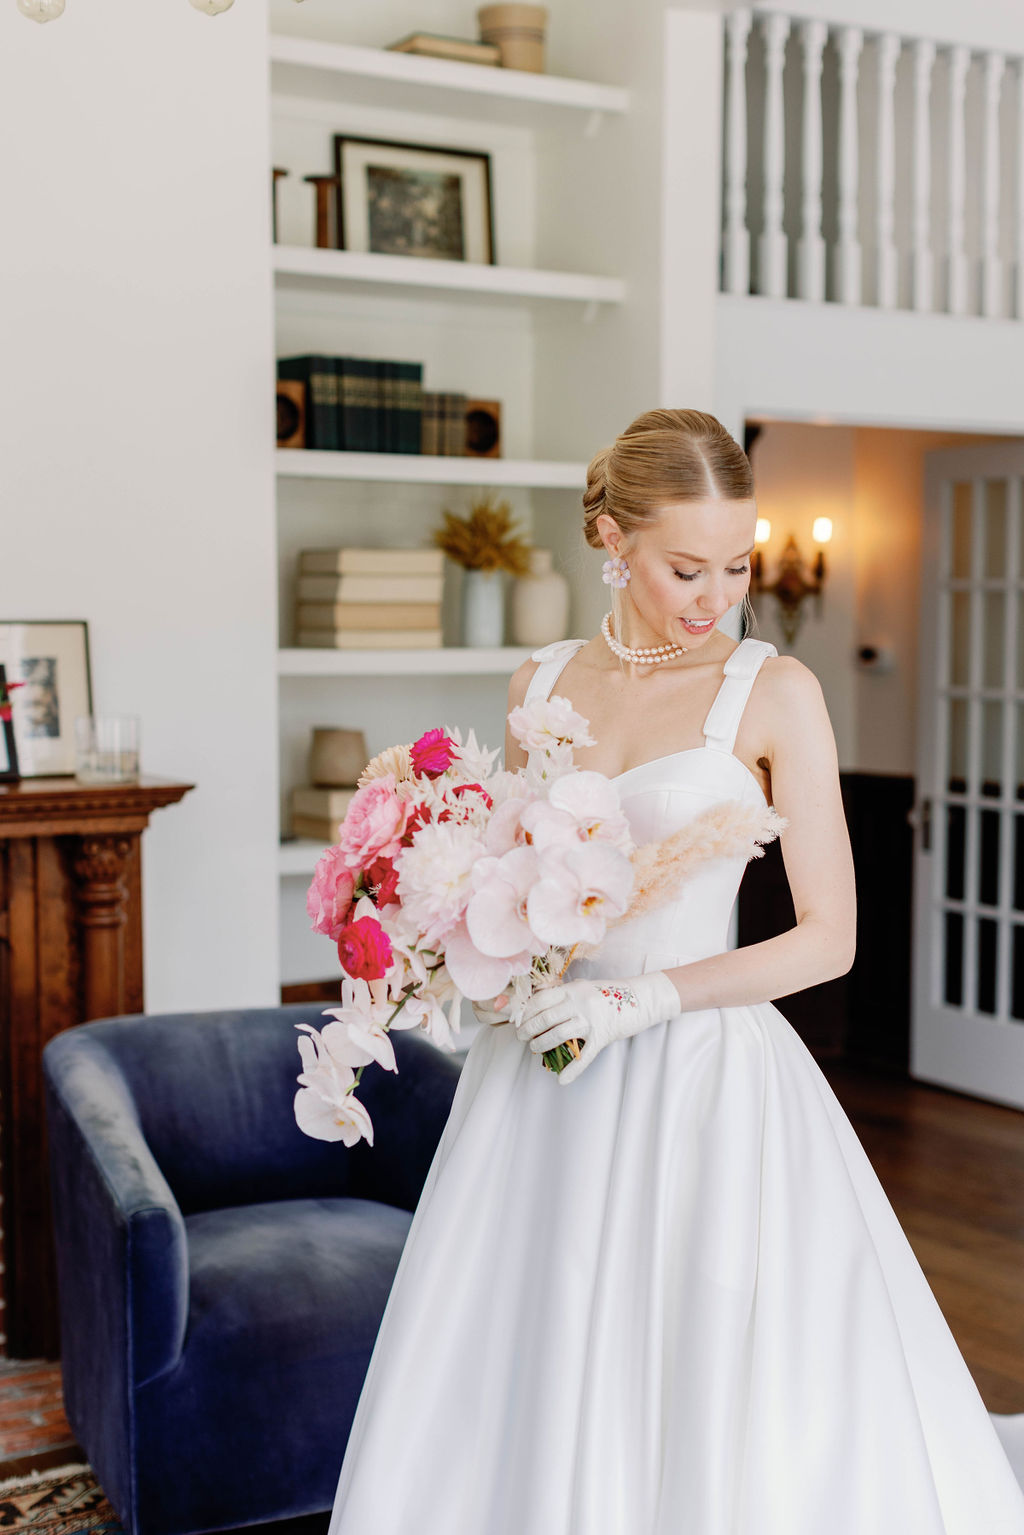 The bride is looking down while holding gher wedding bouquet and standing in the library at the Grand Lady Wedding Venue in Austin Texas. |Photographer Sarah Block of Sarah Block Photography